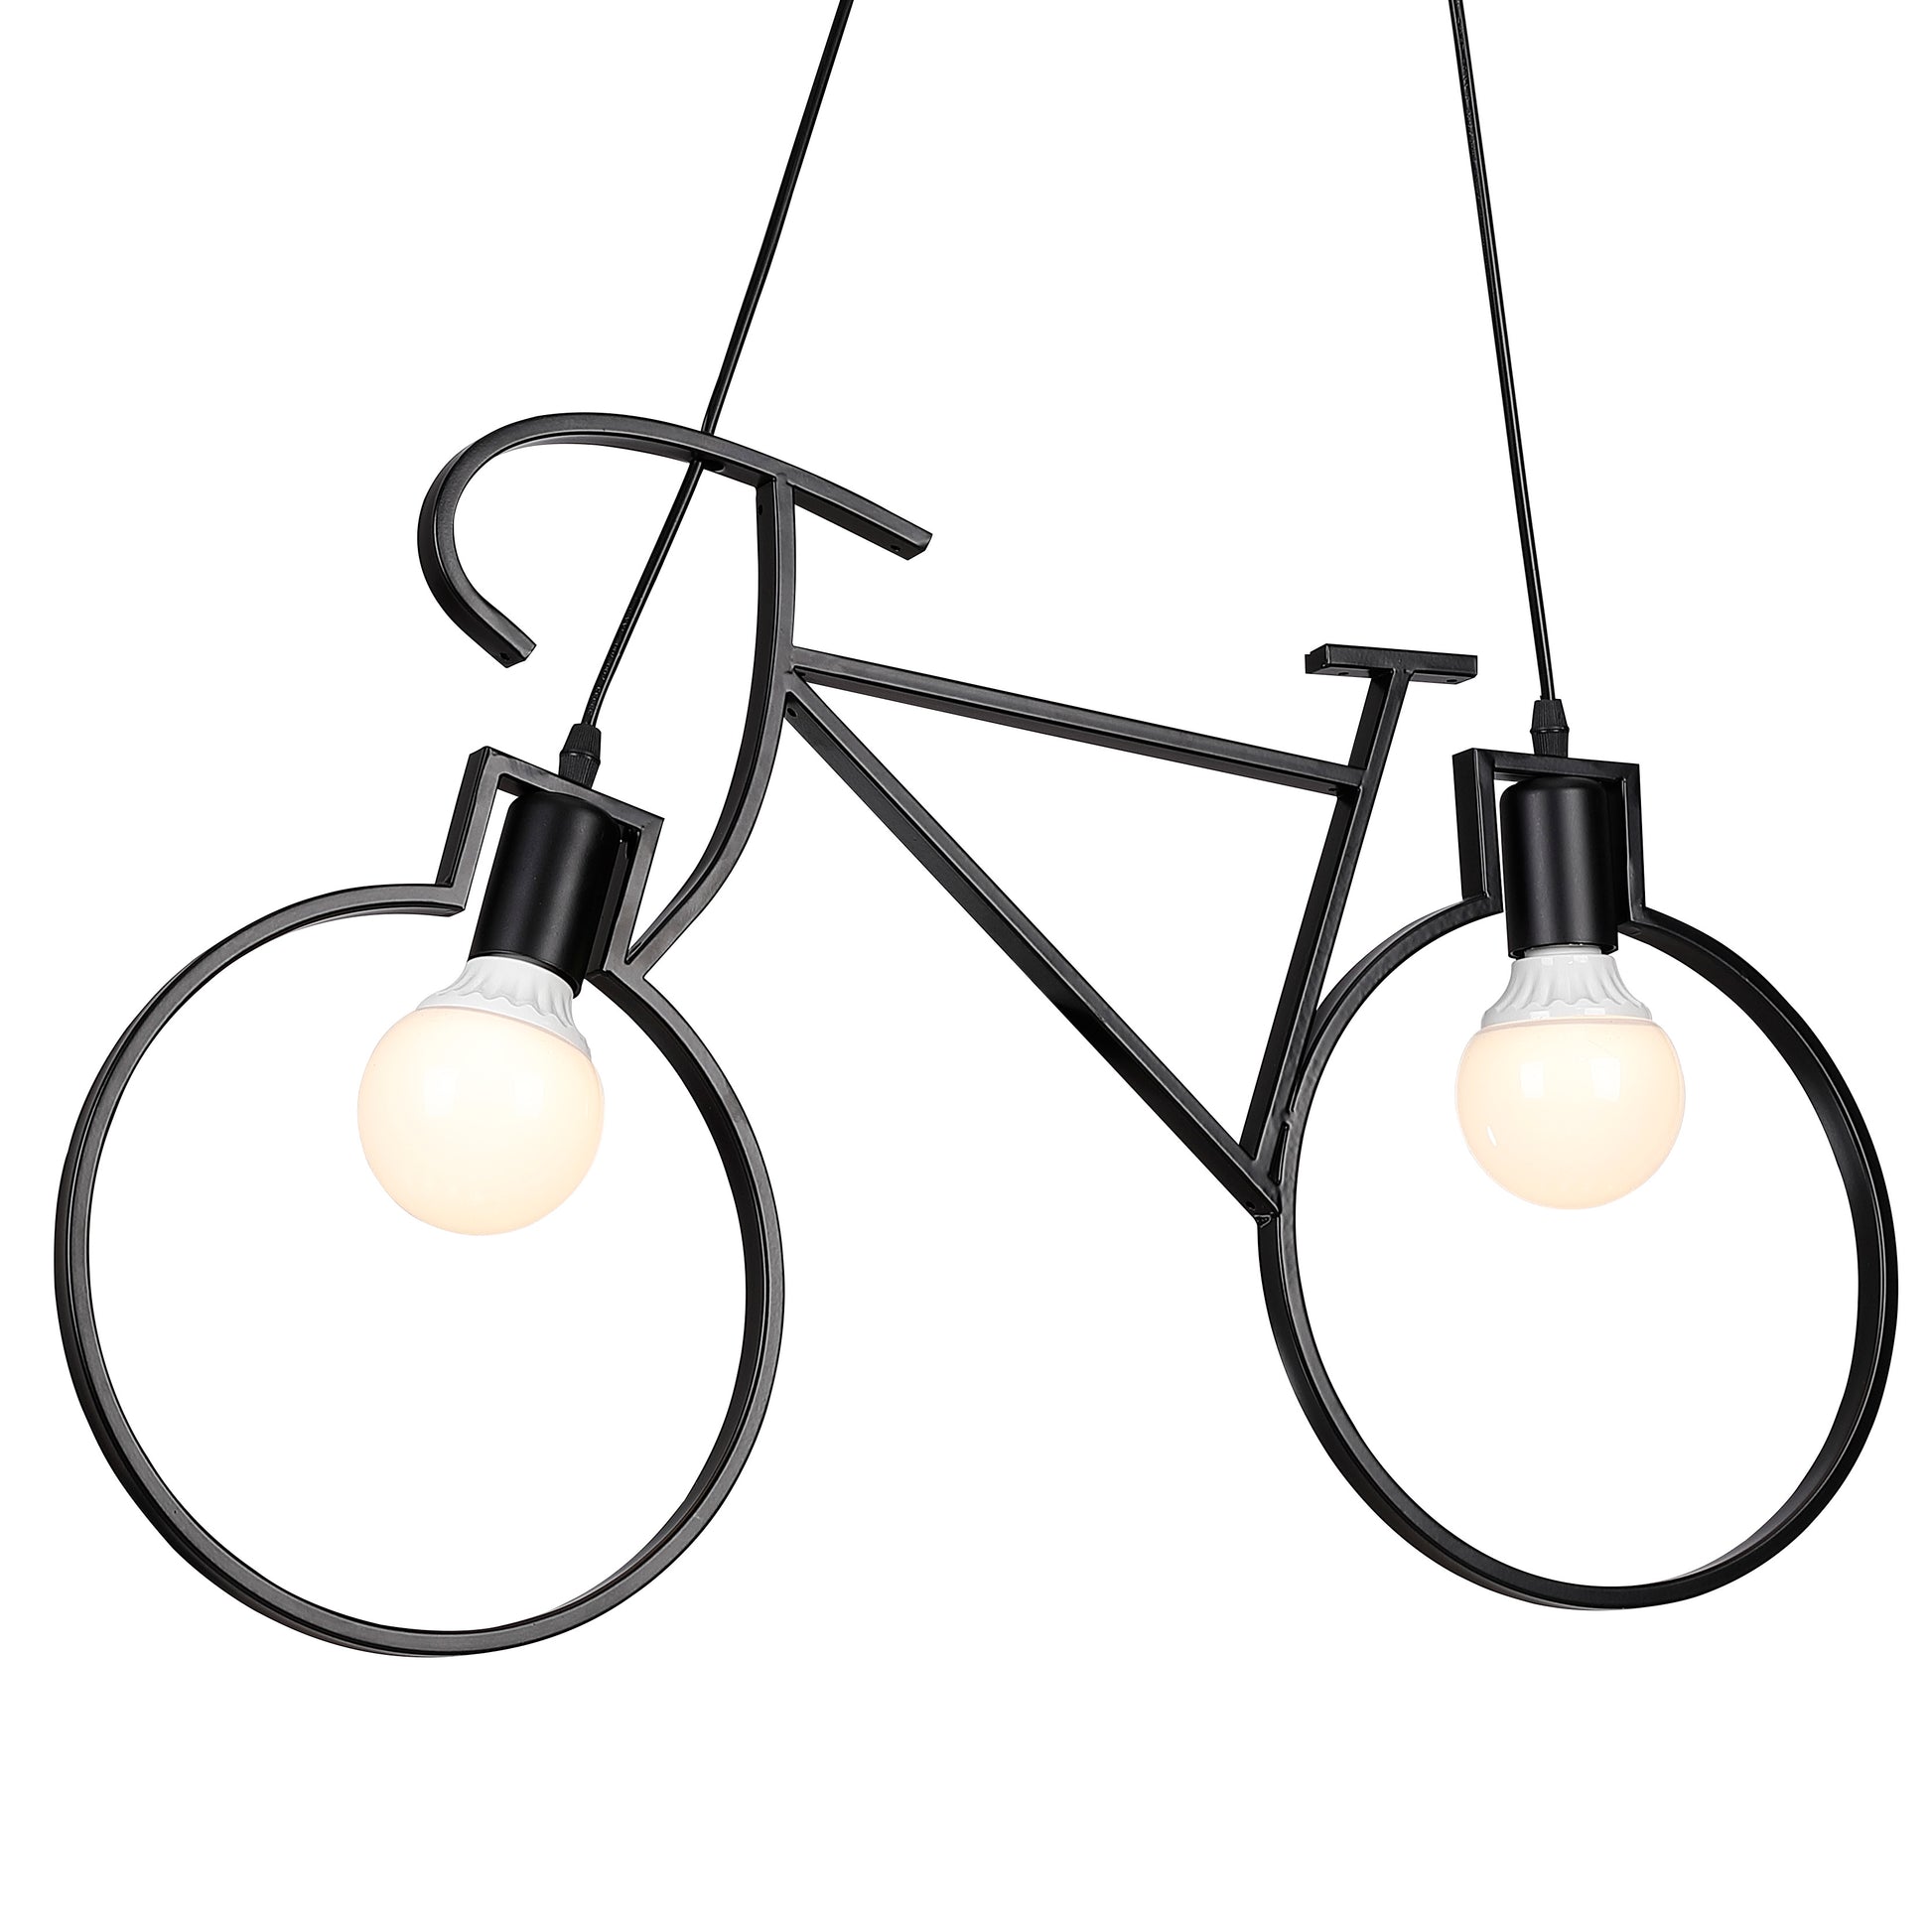 Iron Bike Industrial Pendent Light for Dining Room Bedroom